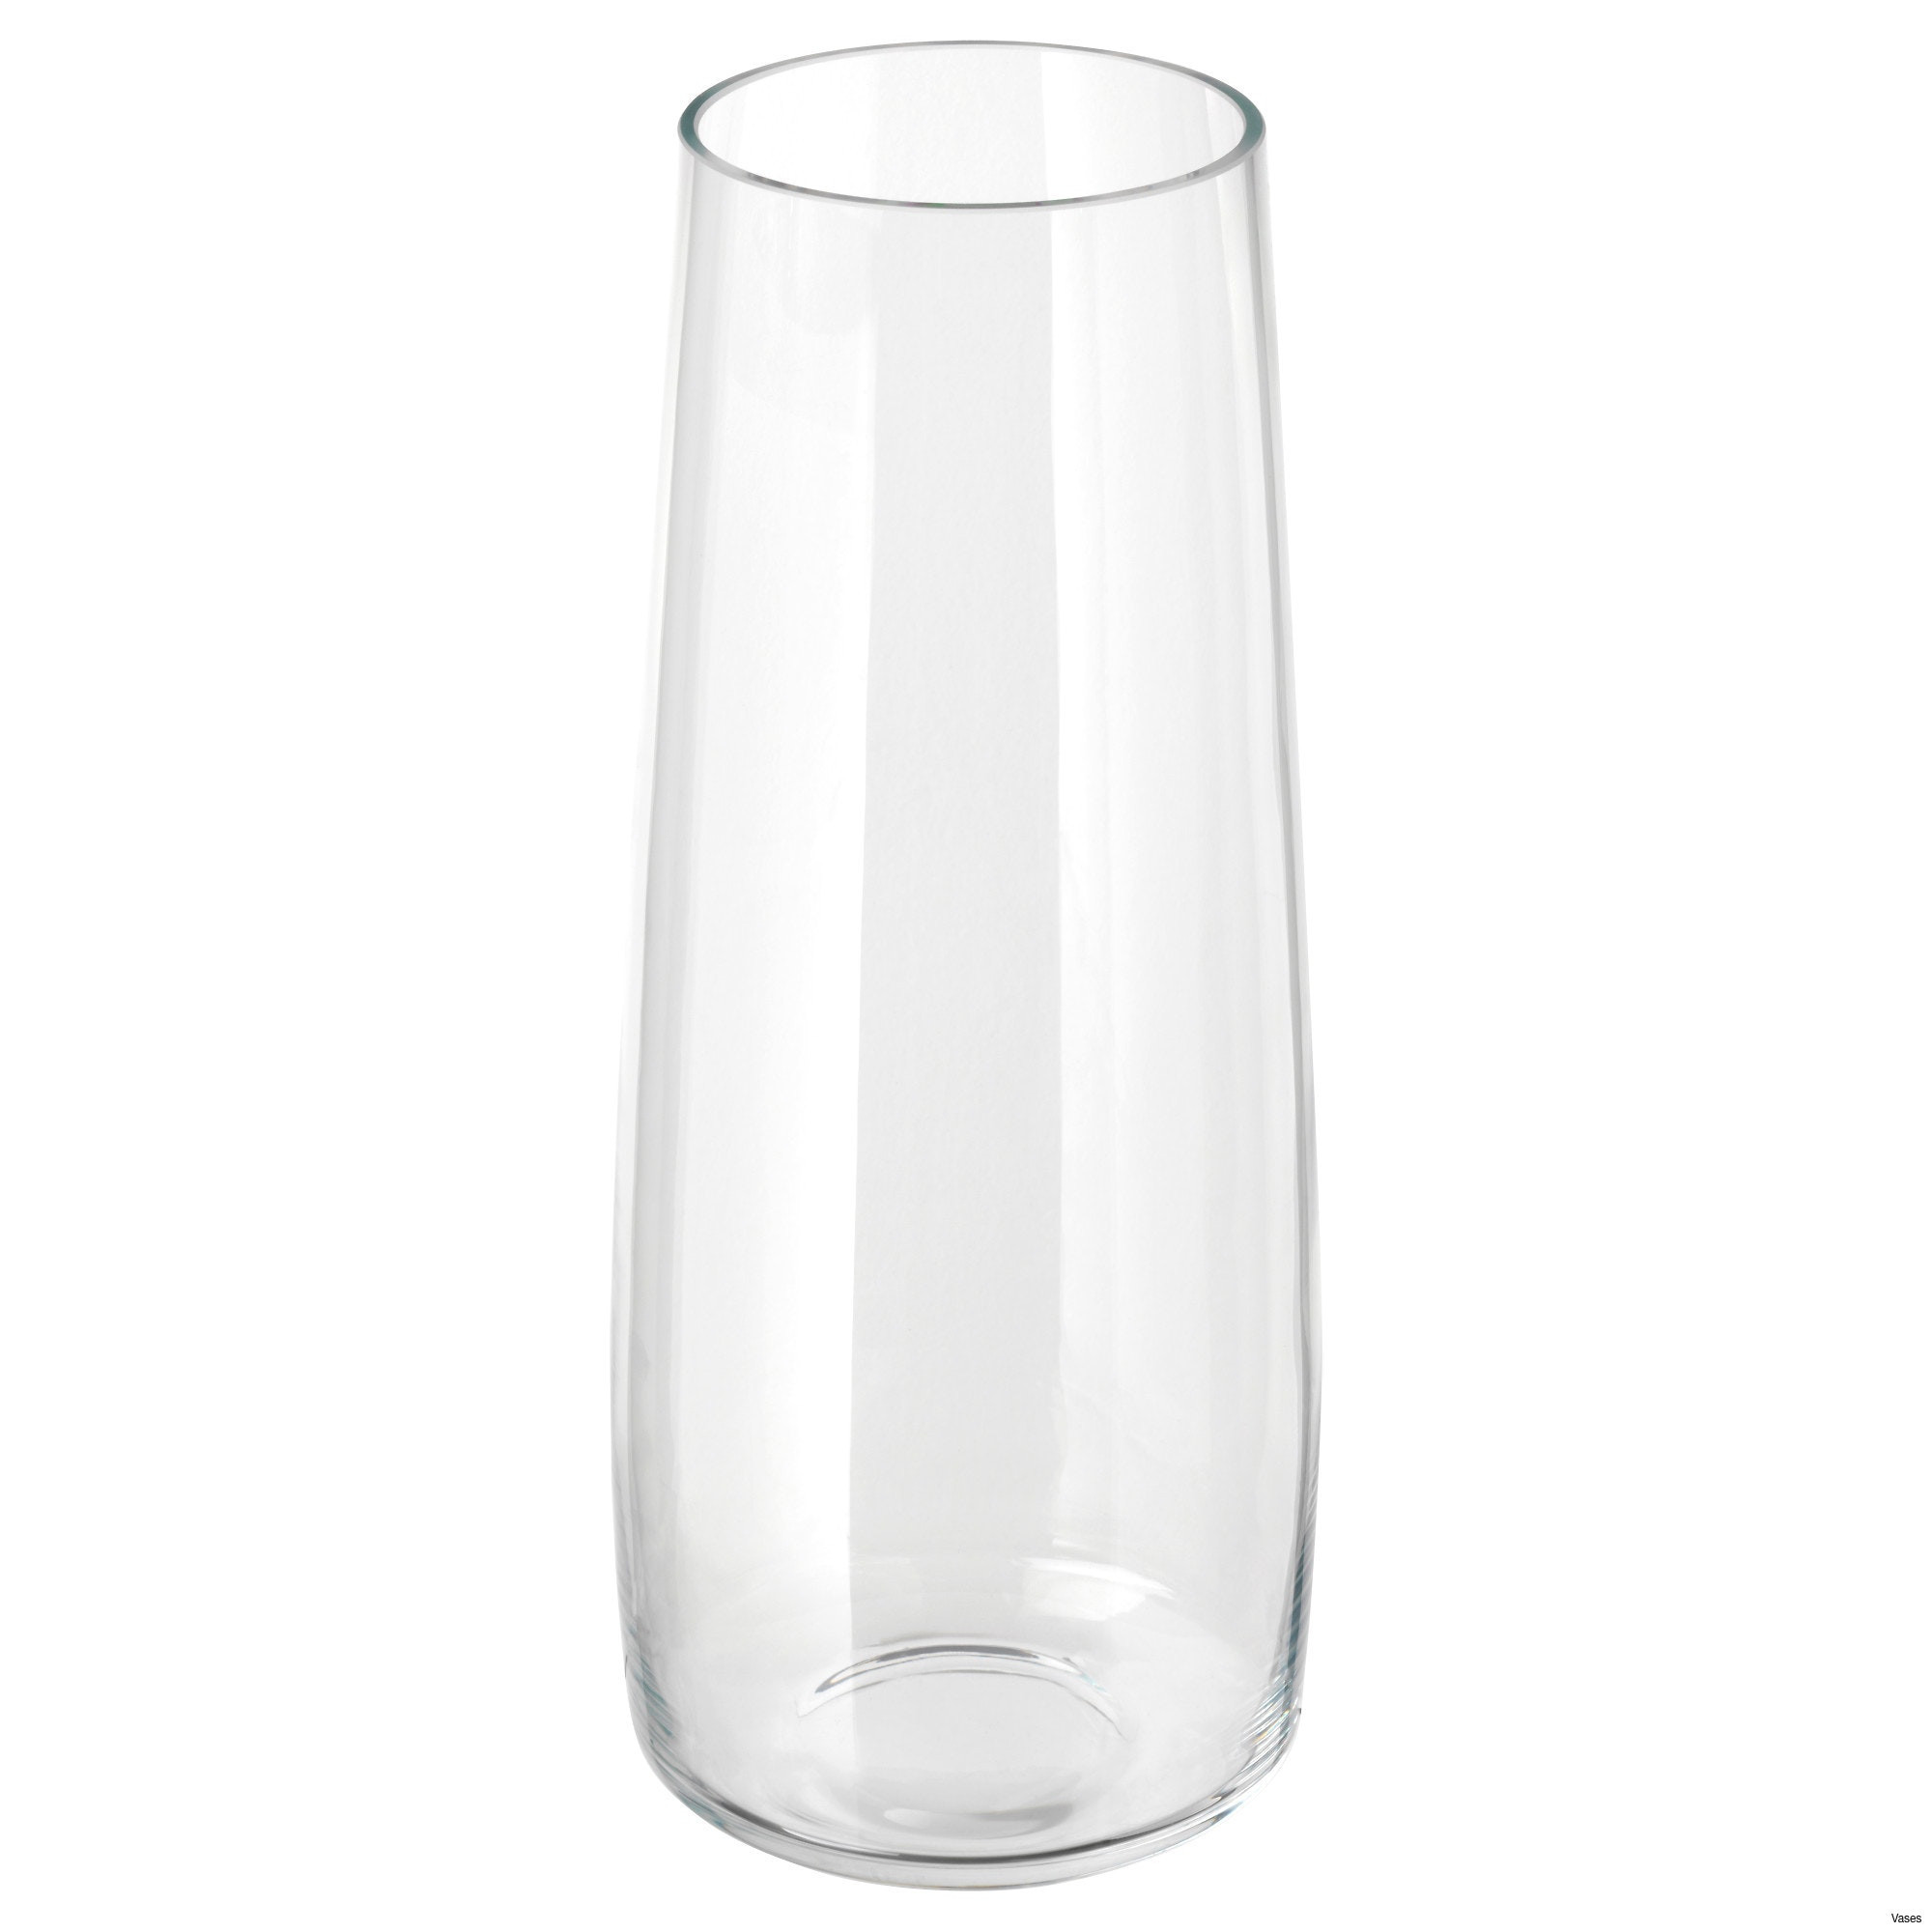 21 Unique Milk Glass Vases wholesale 2024 free download milk glass vases wholesale of large glass vases gallery living room glass vases fresh clear vase in large glass vases pictures clear glass planters fresh clear glass vases of large glass vas